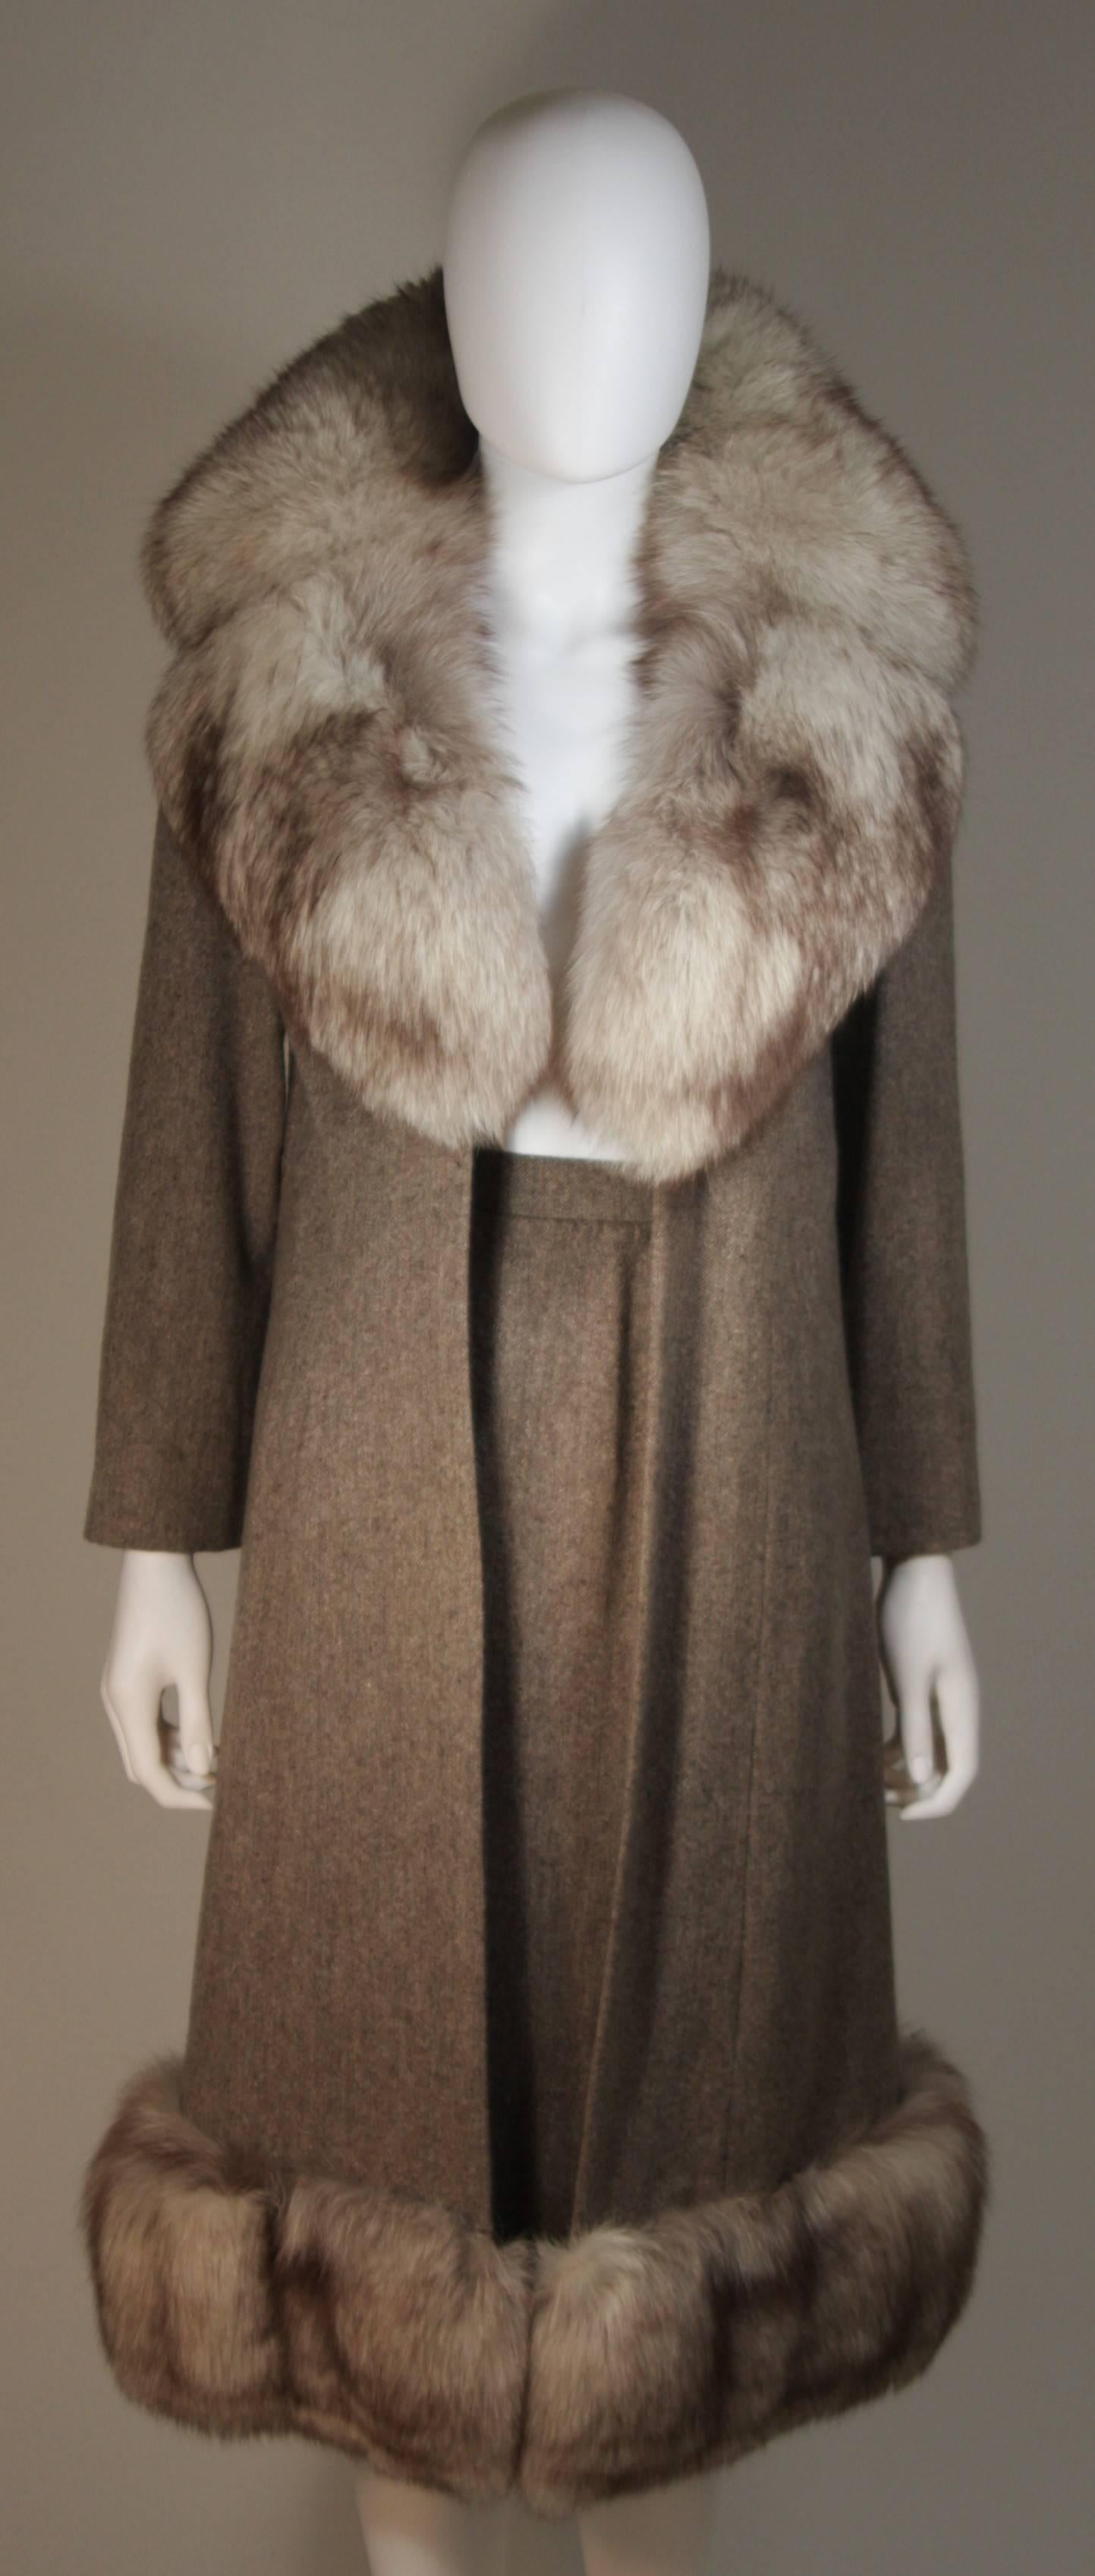 This Nolan Miller set is composed of a brown/oatmeal combination wool and features fox fur trim. The jacket has a center front hook and eye closure. The skirt features a draped design with zipper closure. In excellent condition.

  **Please